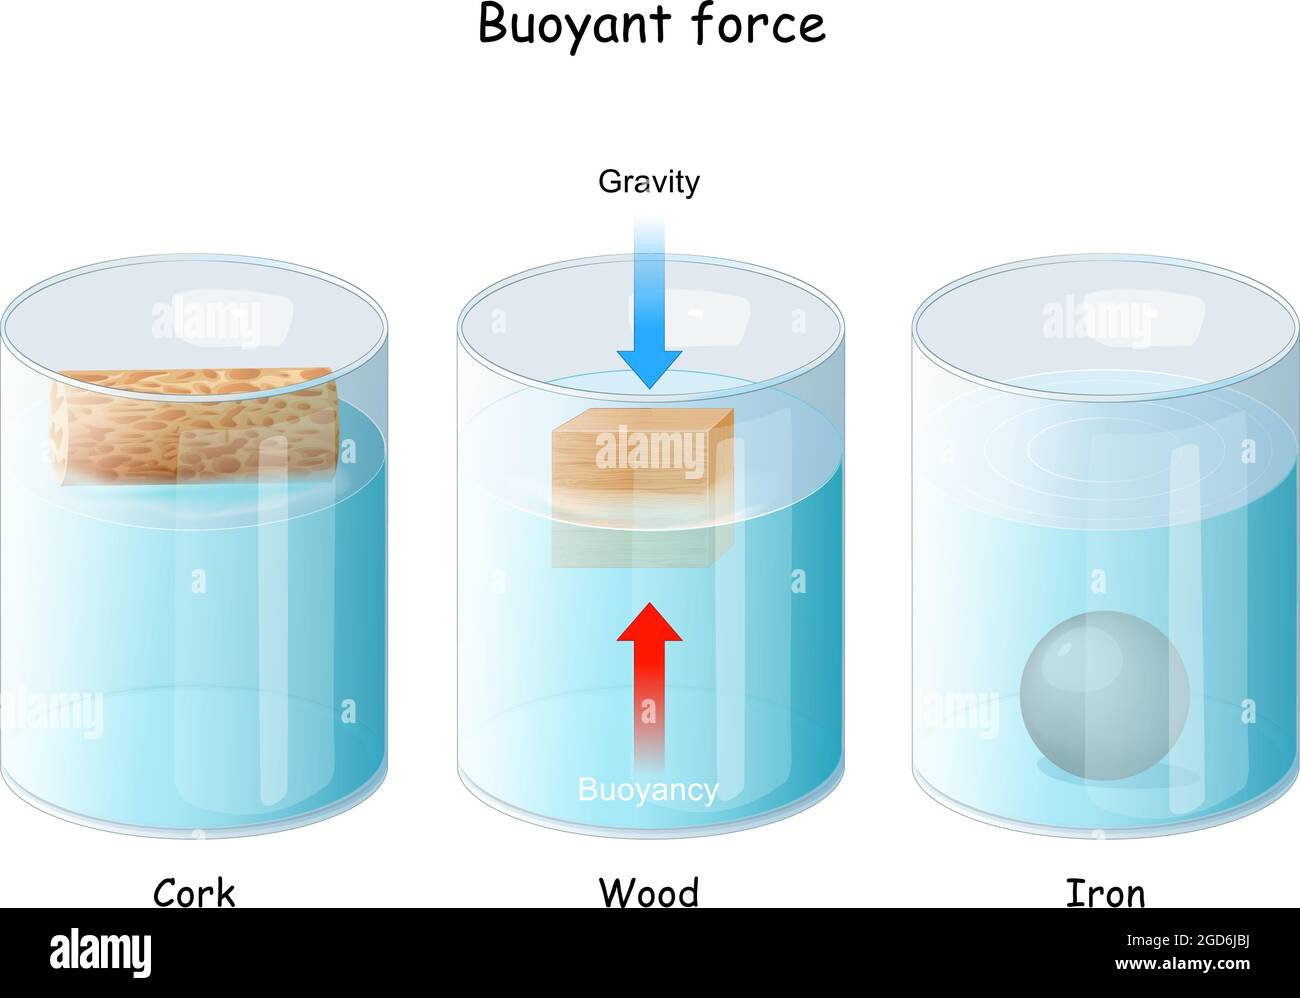 Buoyant force. Archimedes' principle. Iron ball, Wood cube, and Cork floating in glassware. physical law. Beaker with liquid fluid Stock Vector